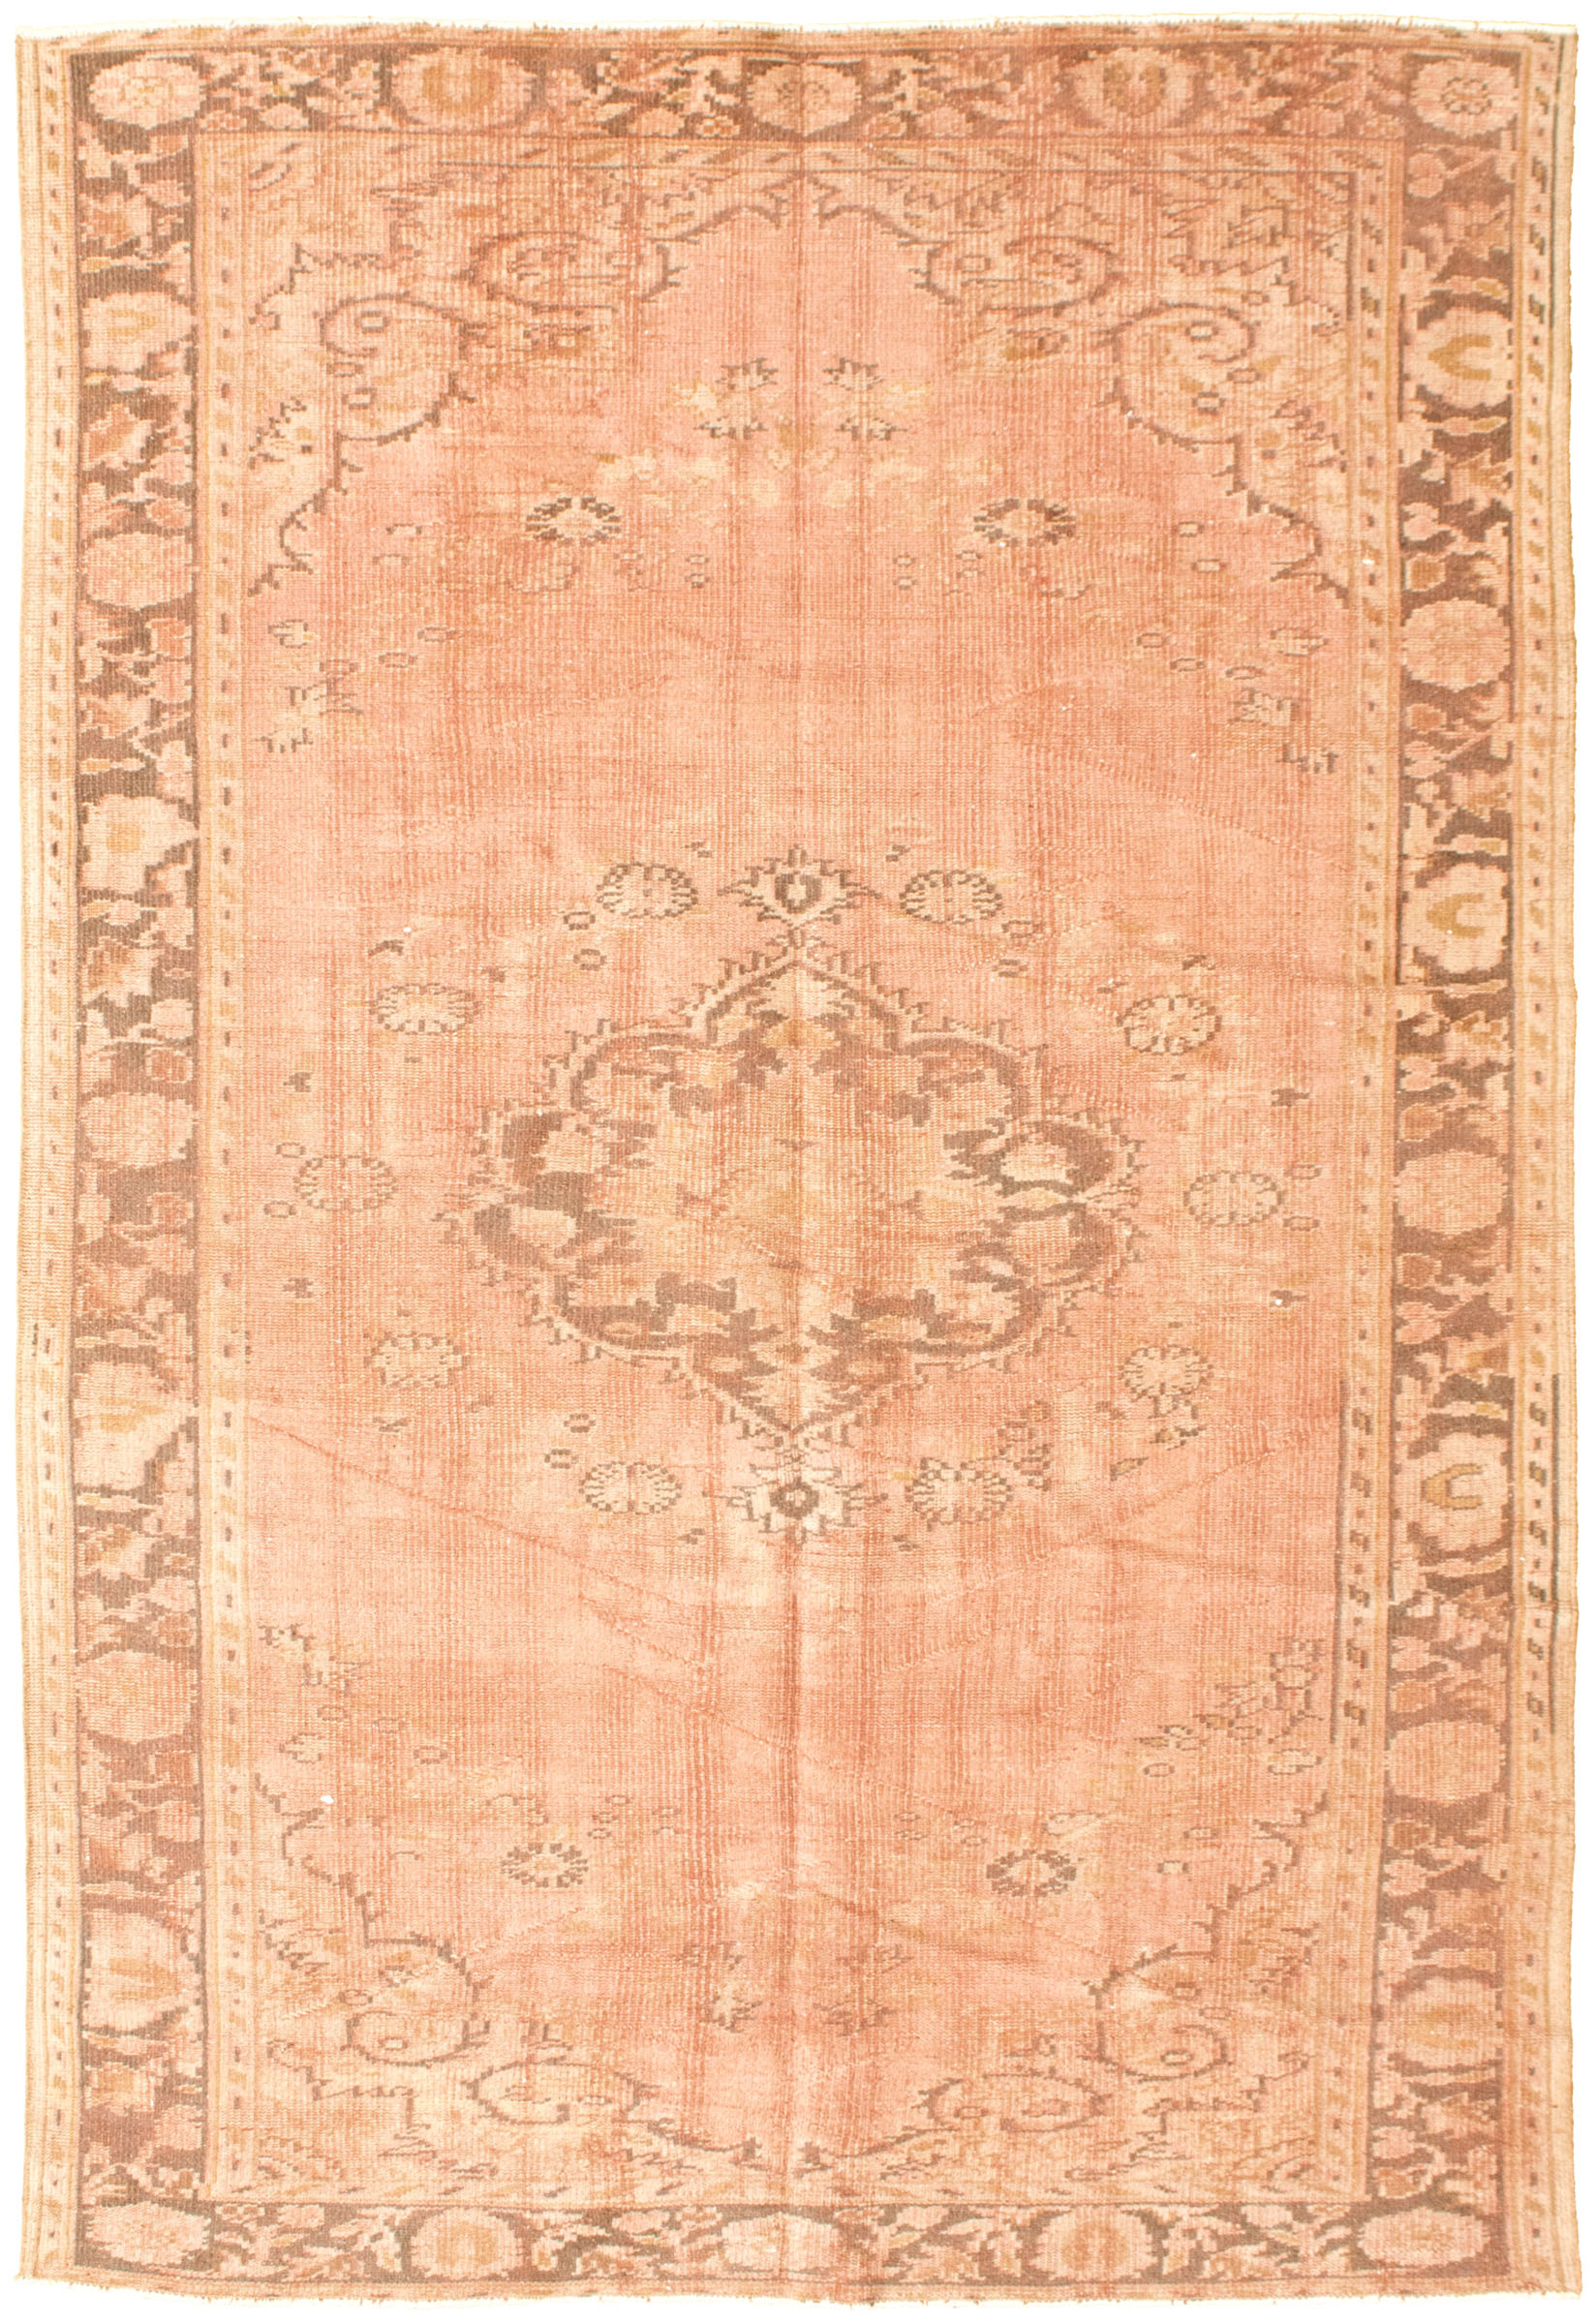 Hand-knotted Antalya Vintage   Rug 8'10" x 5'7" Size: 8'10" x 5'7"  